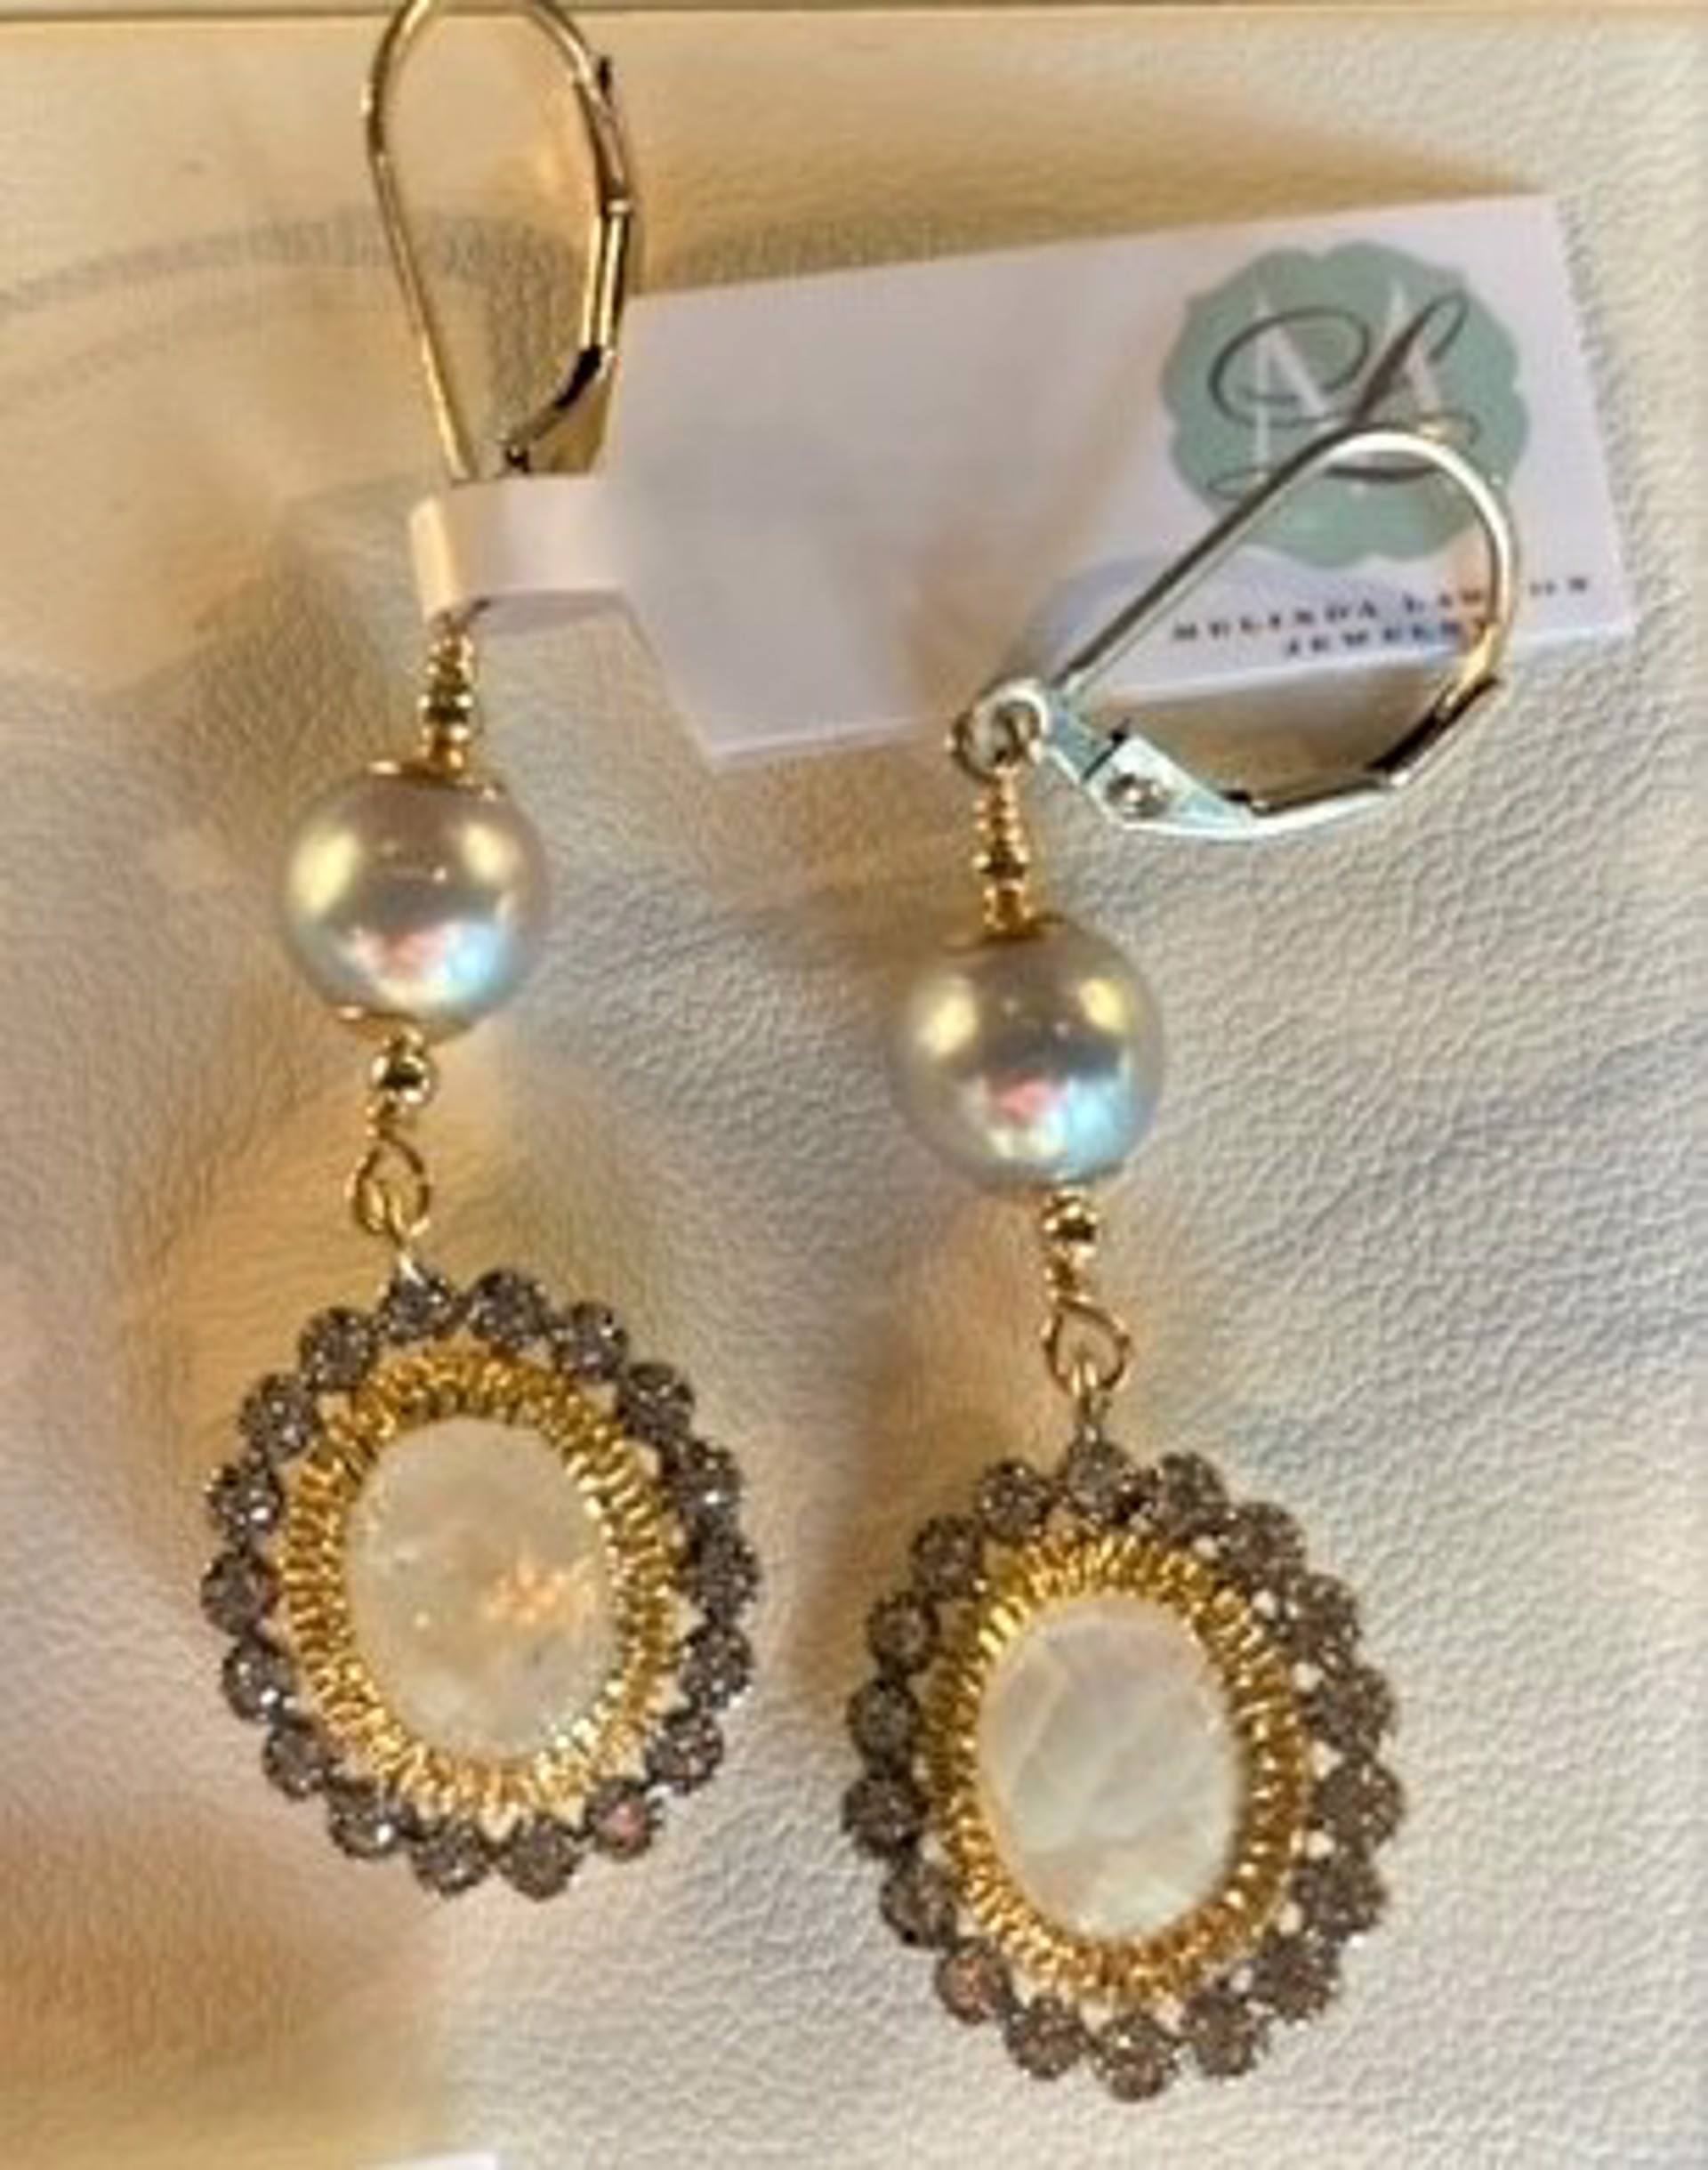 Moonstone drops surroundeed by pave white topaz with Japanese akoya pearls by Melinda Lawton Jewelry